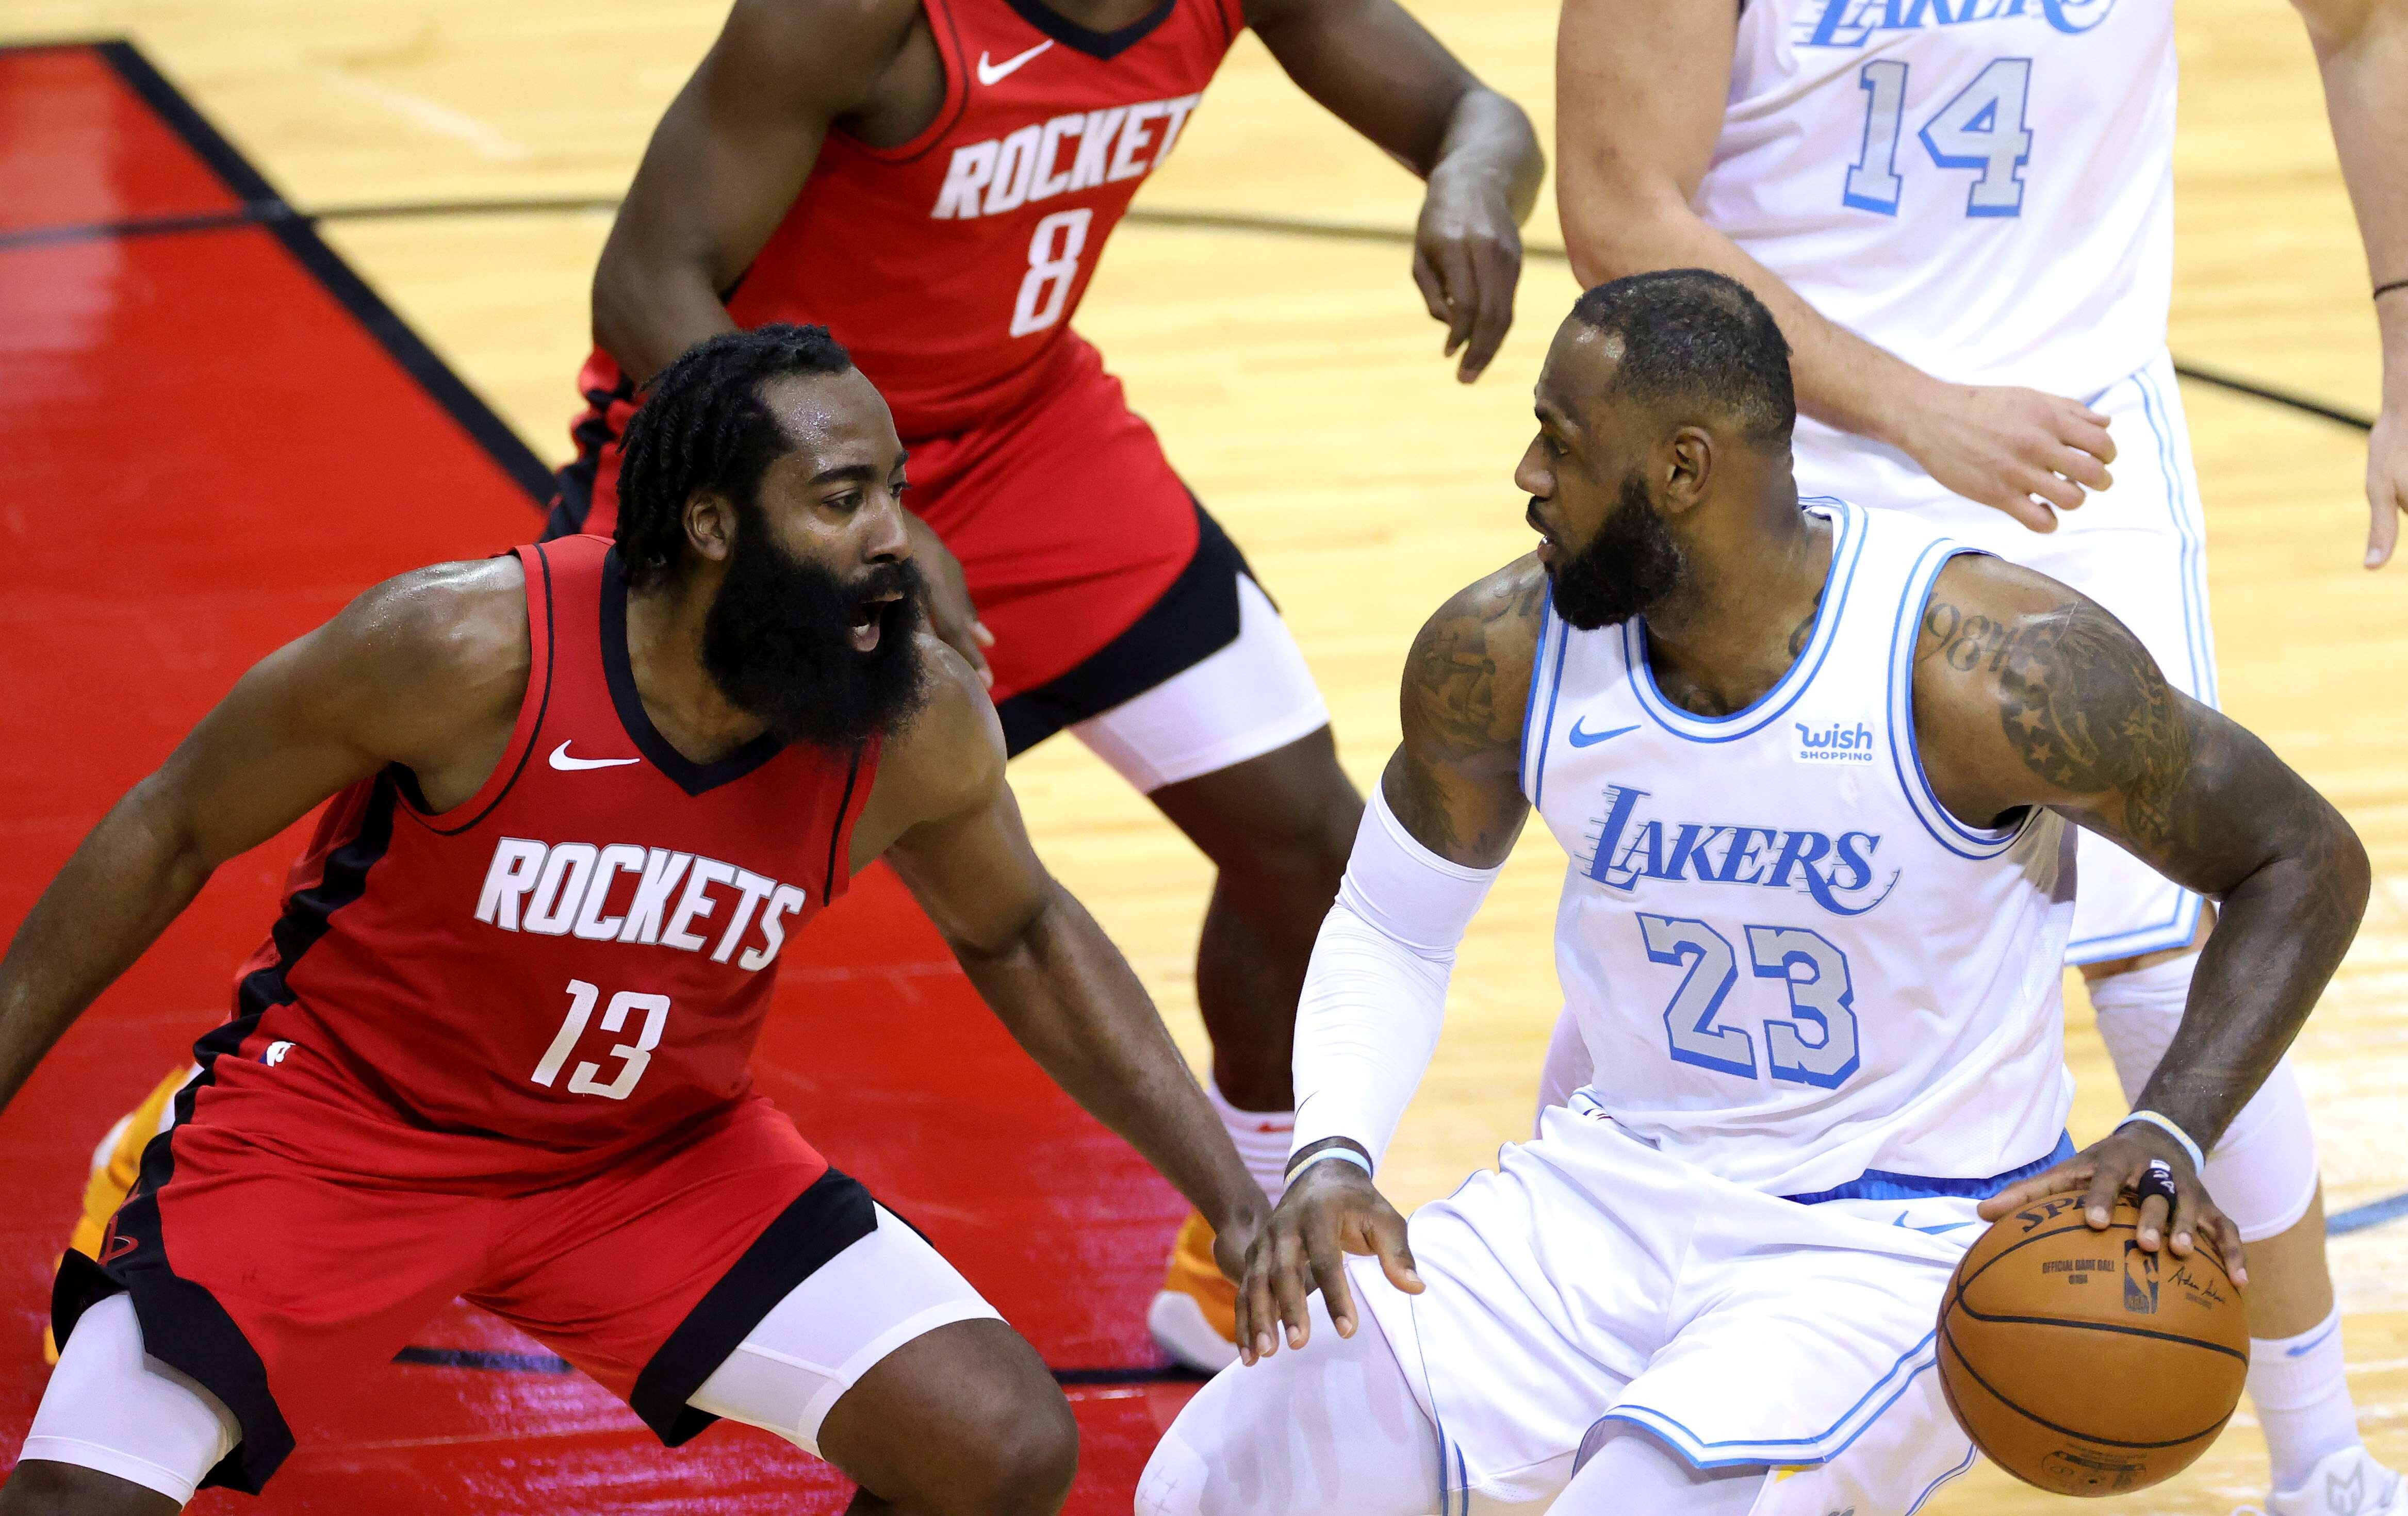 LeBron James of the Los Angeles Lakers takes on James Harden of the Houston Rockets in the NBA in January. Photo: AFP